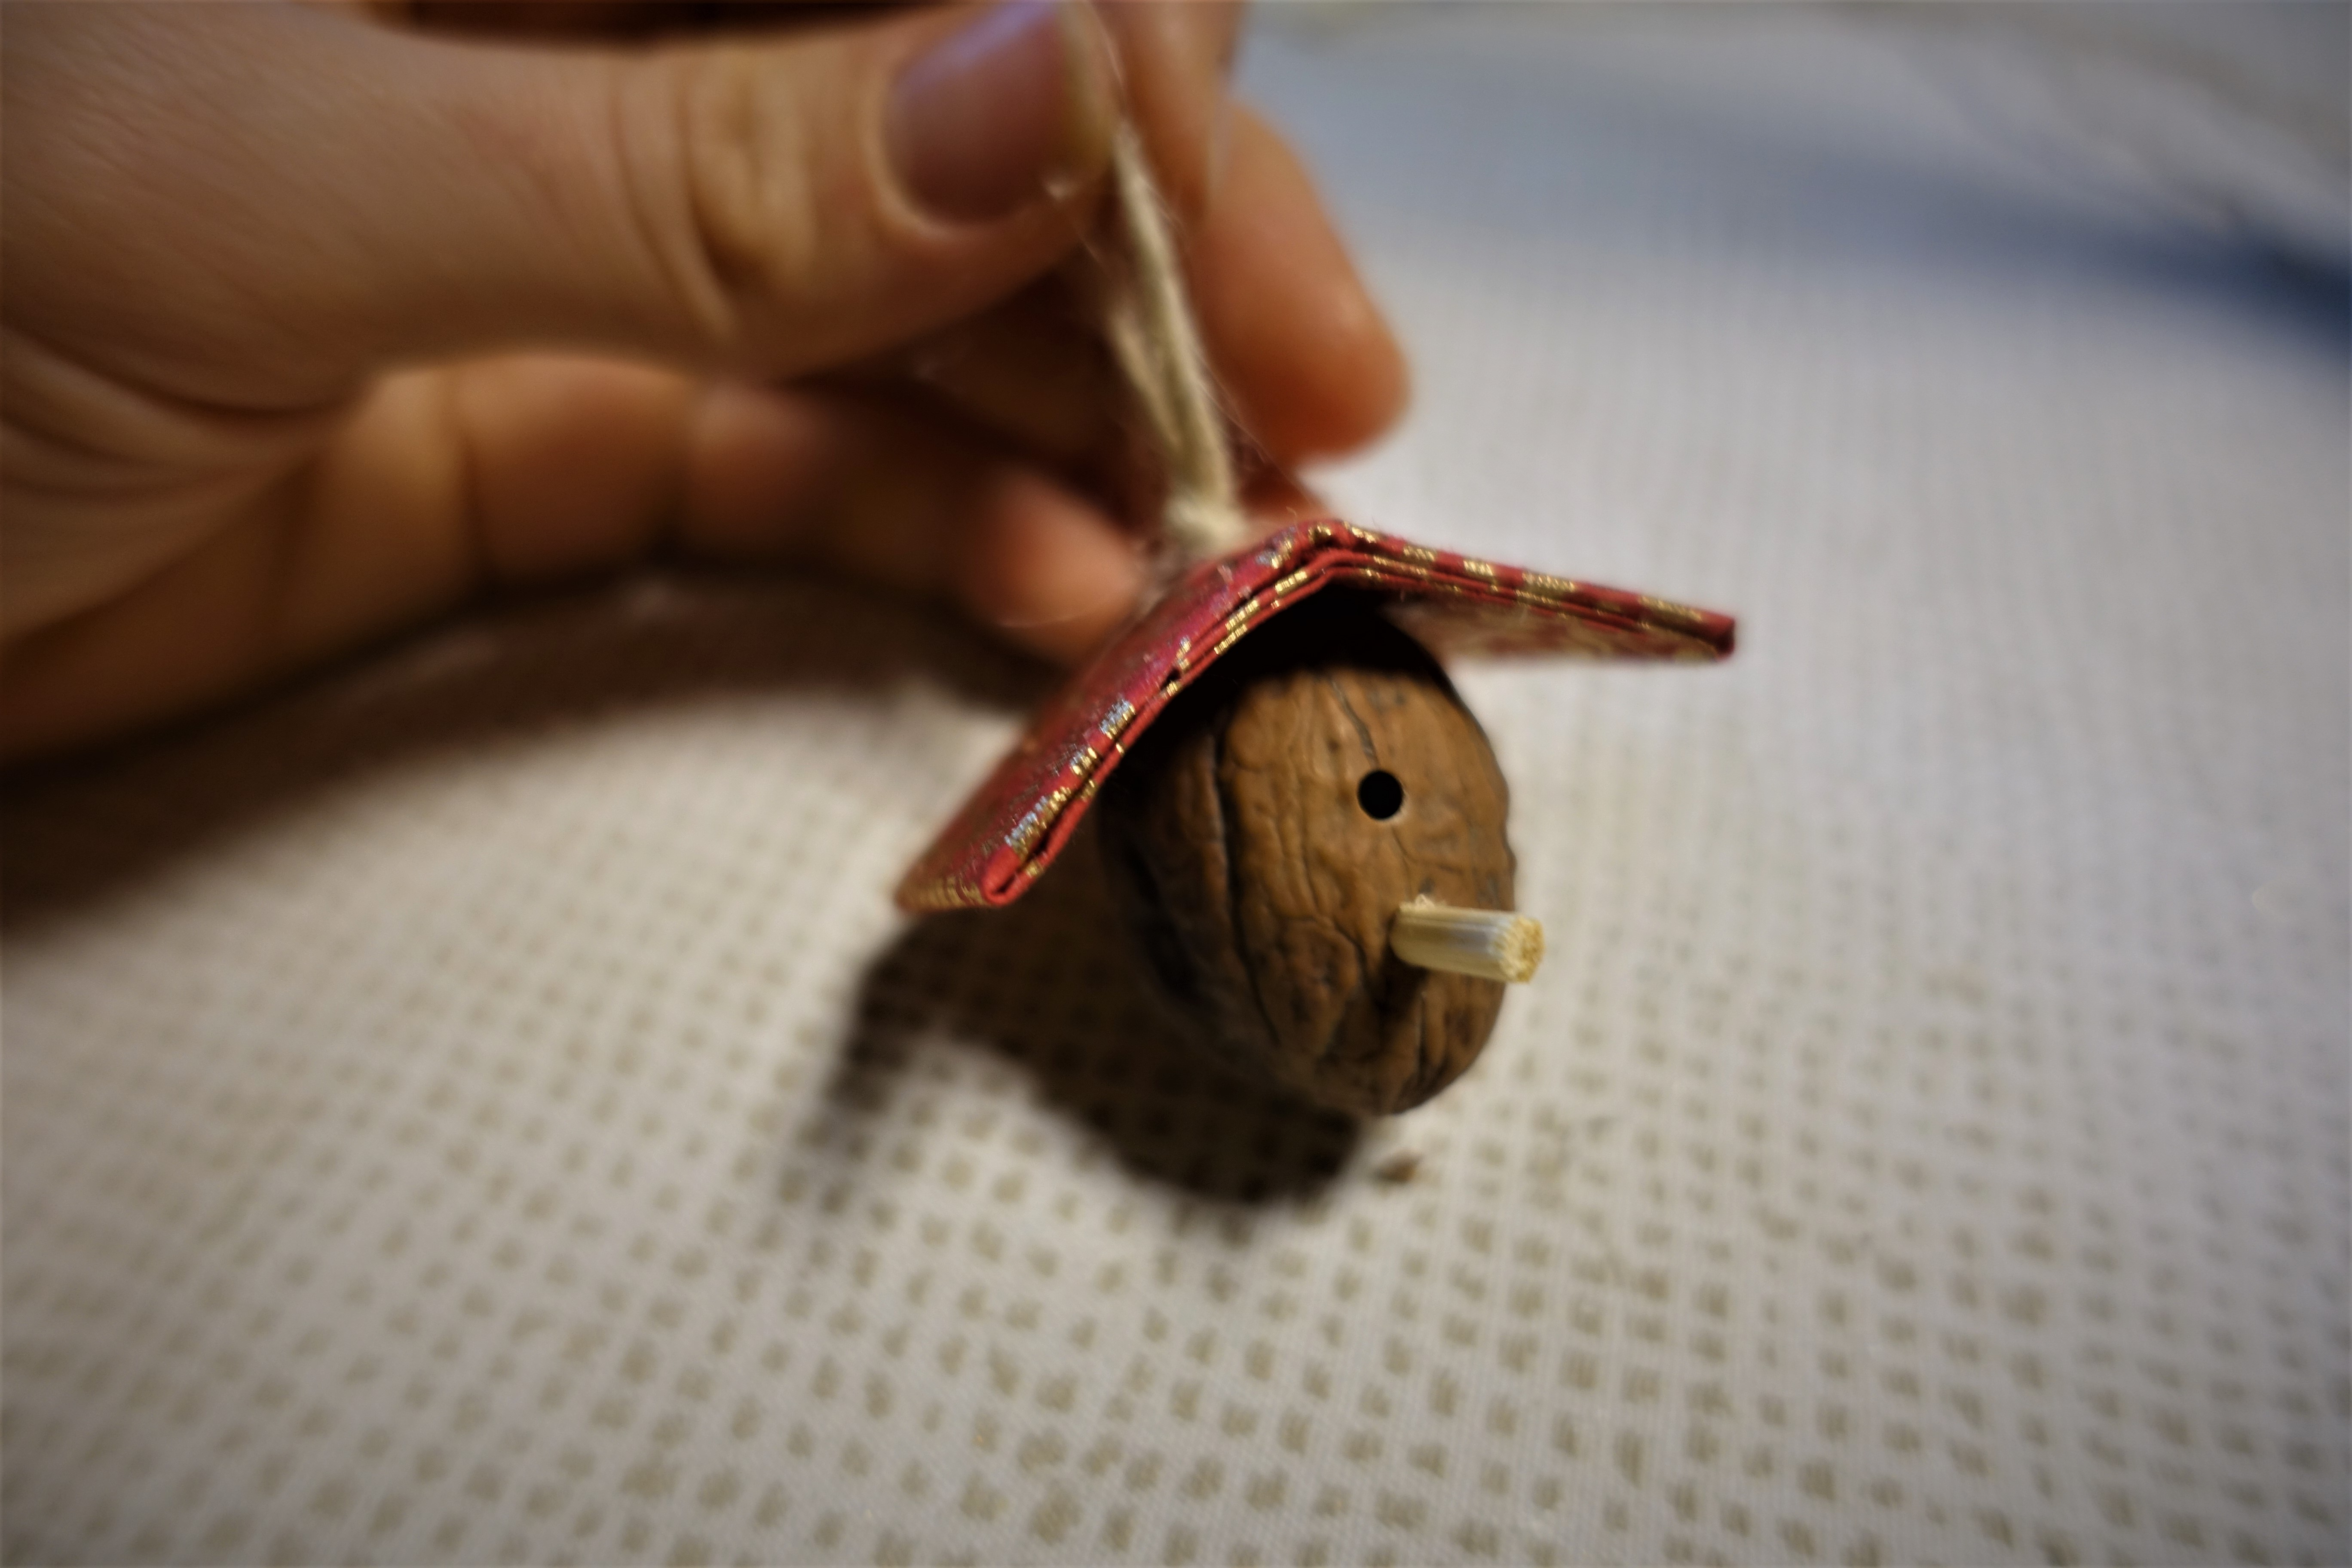 A bird house ornament made out of a walnut